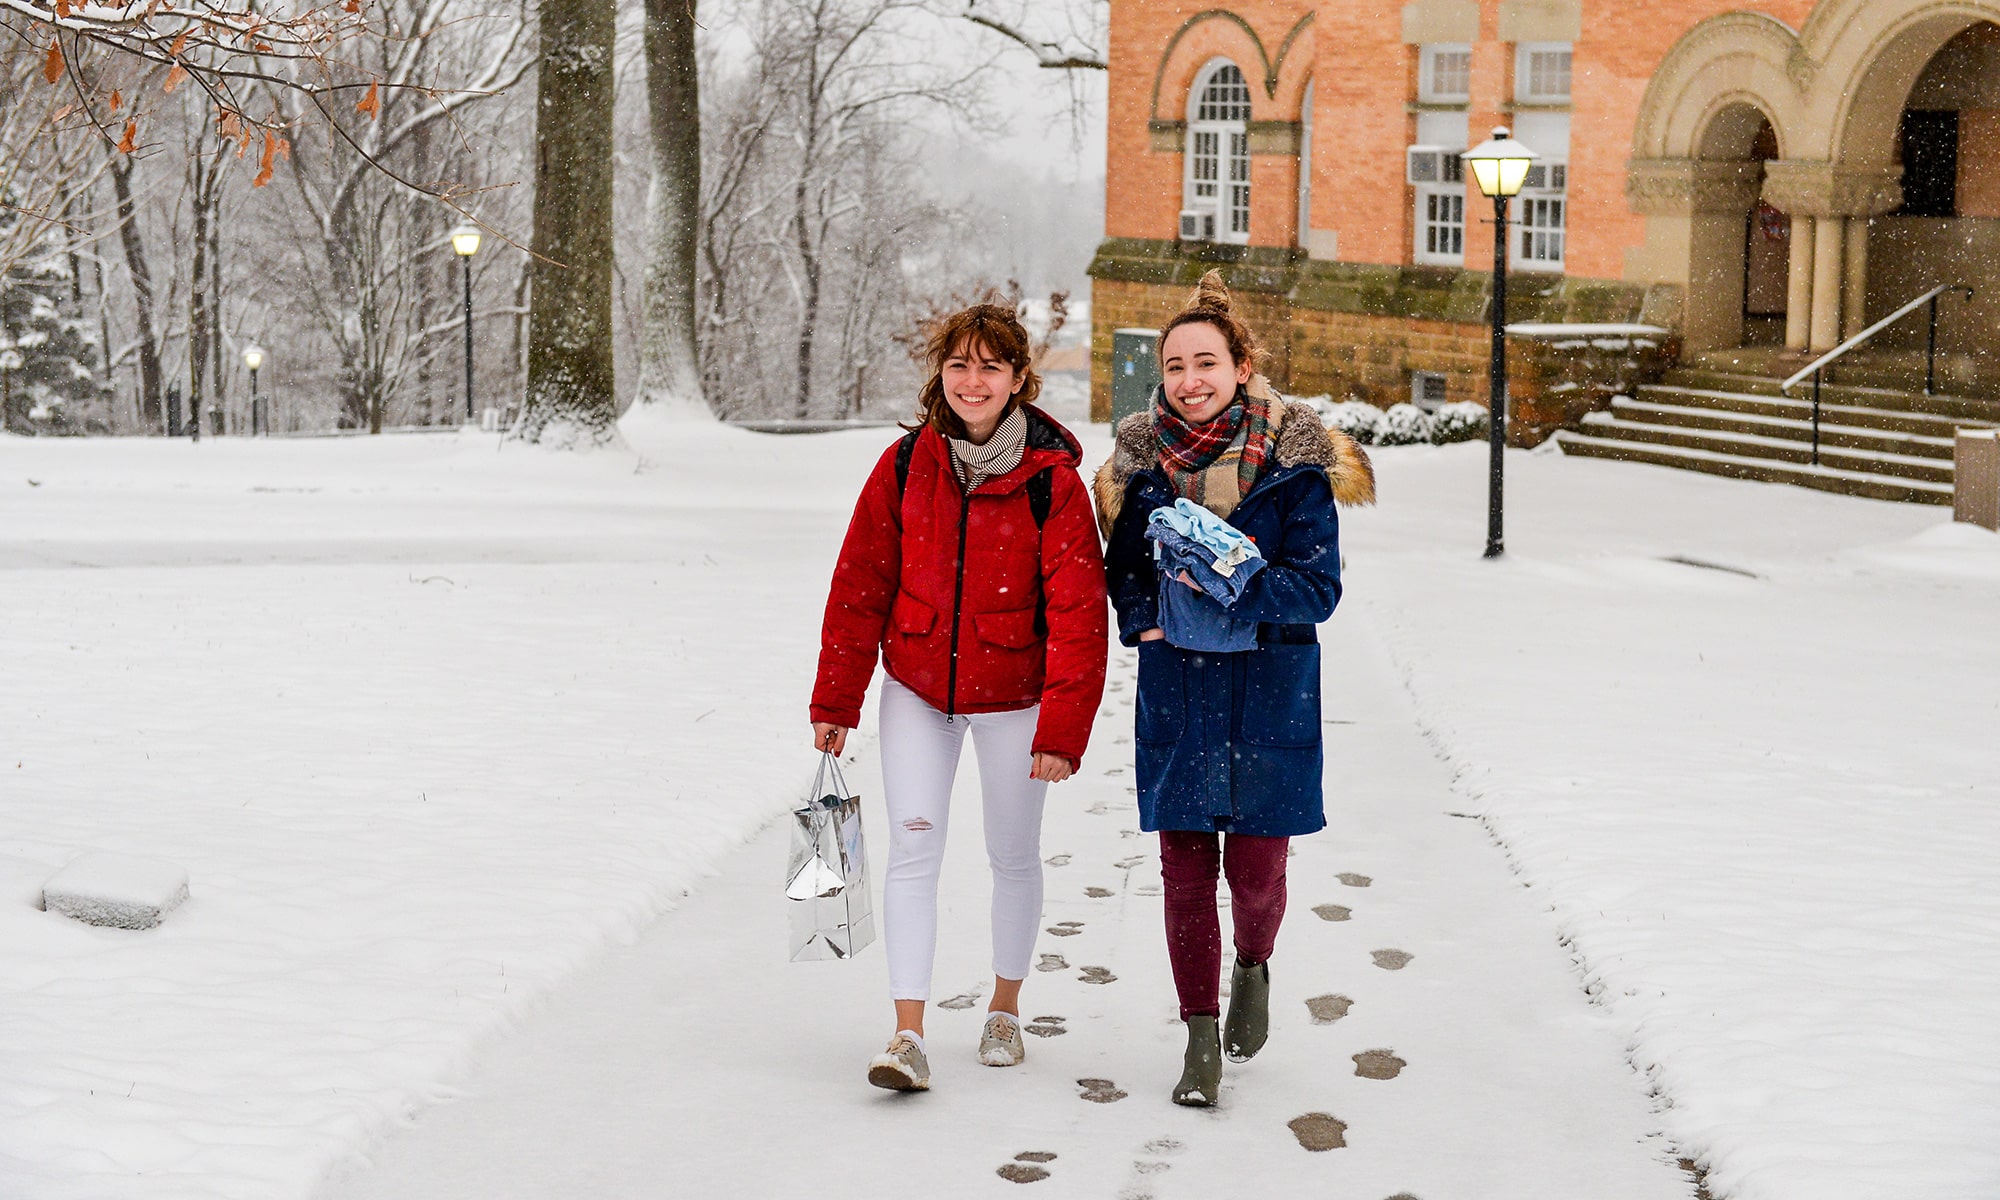 Students walking around campus in the snow